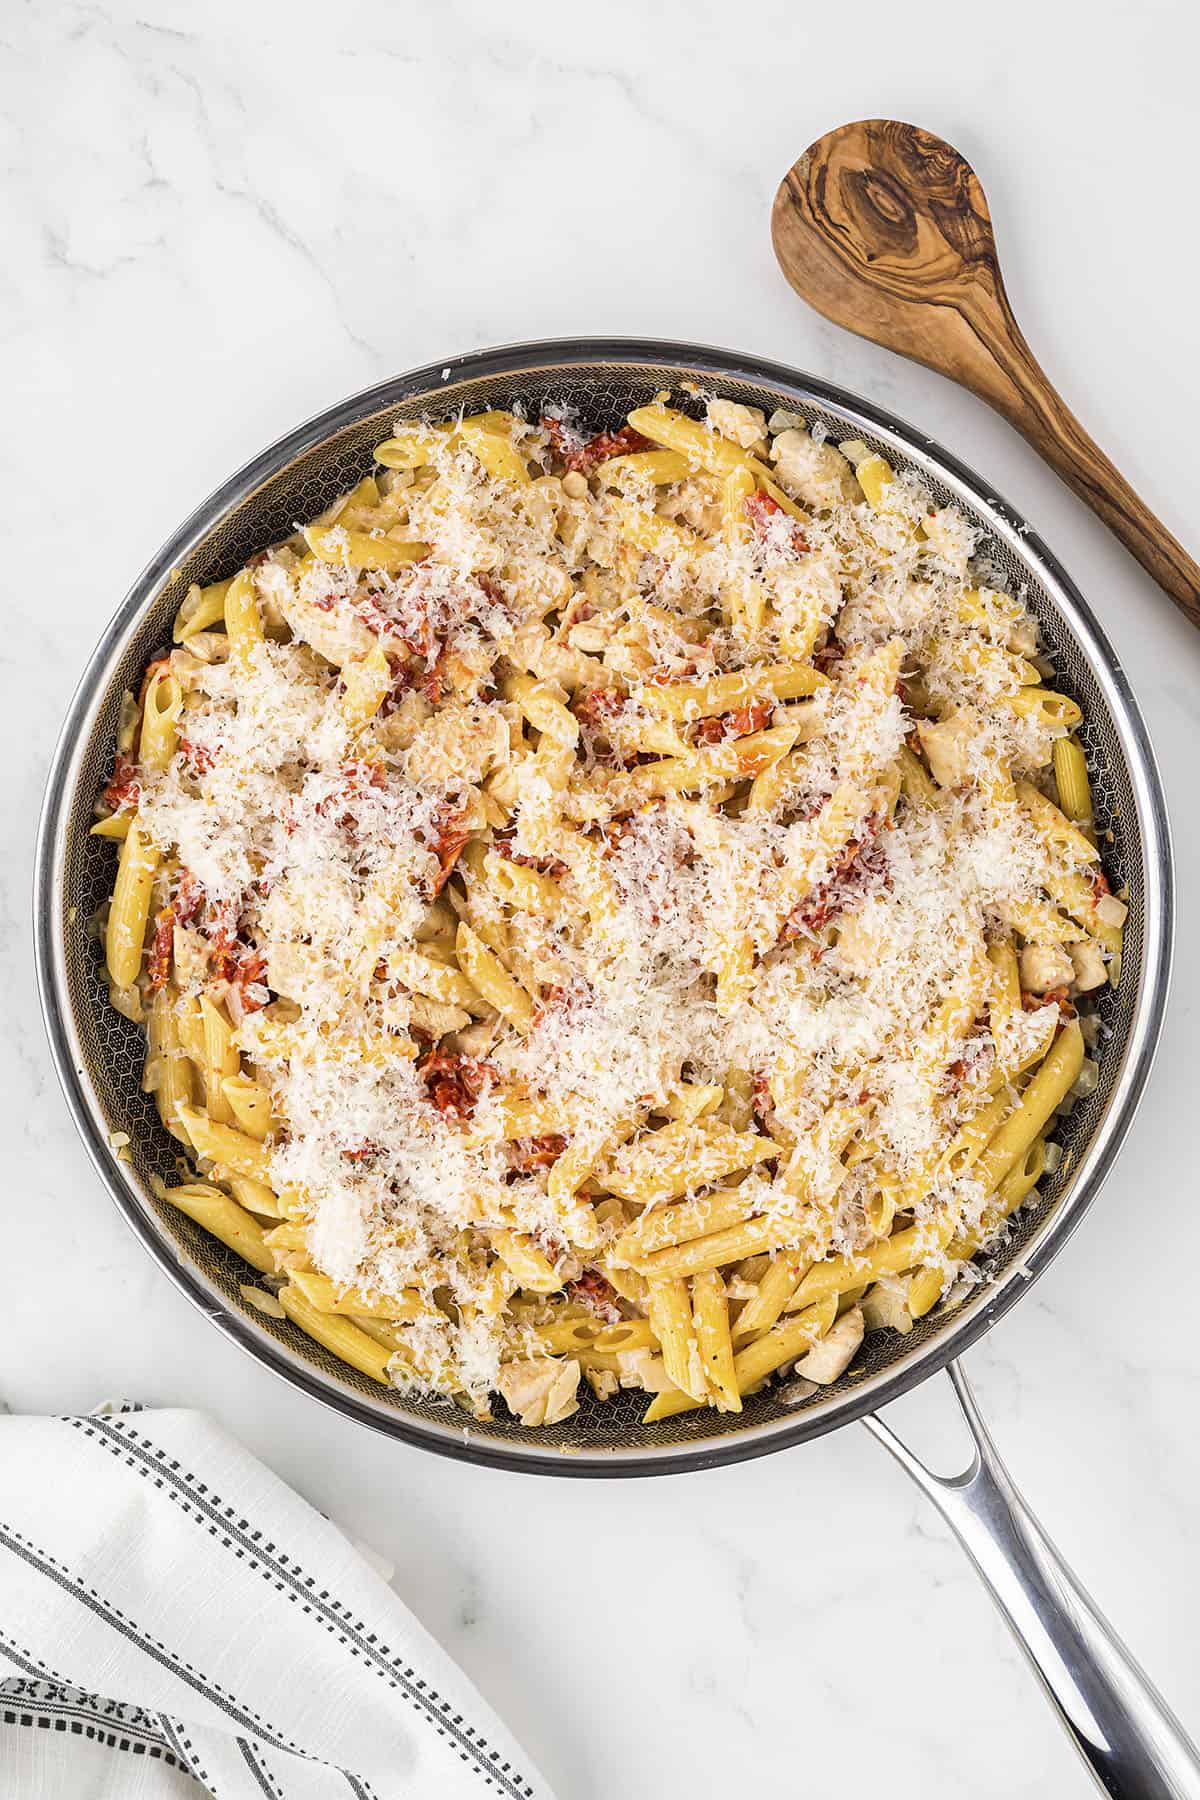 Parmesan cheese sprinkled over pasta.